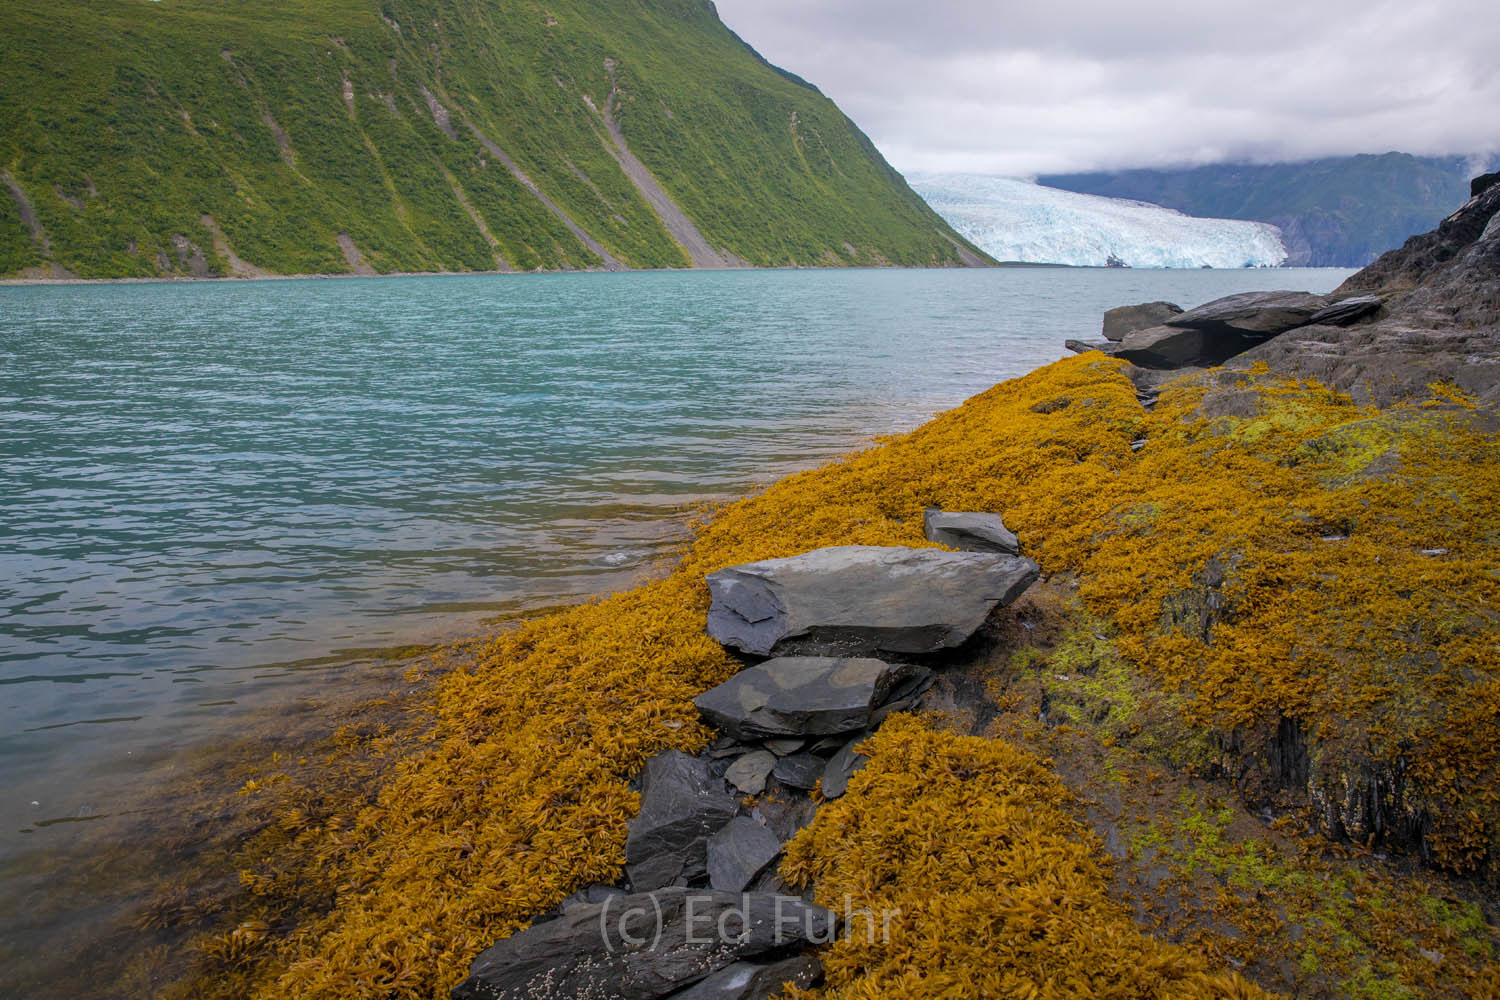 A beautiful resting spot for a kayak trip to Aialik Glacier.